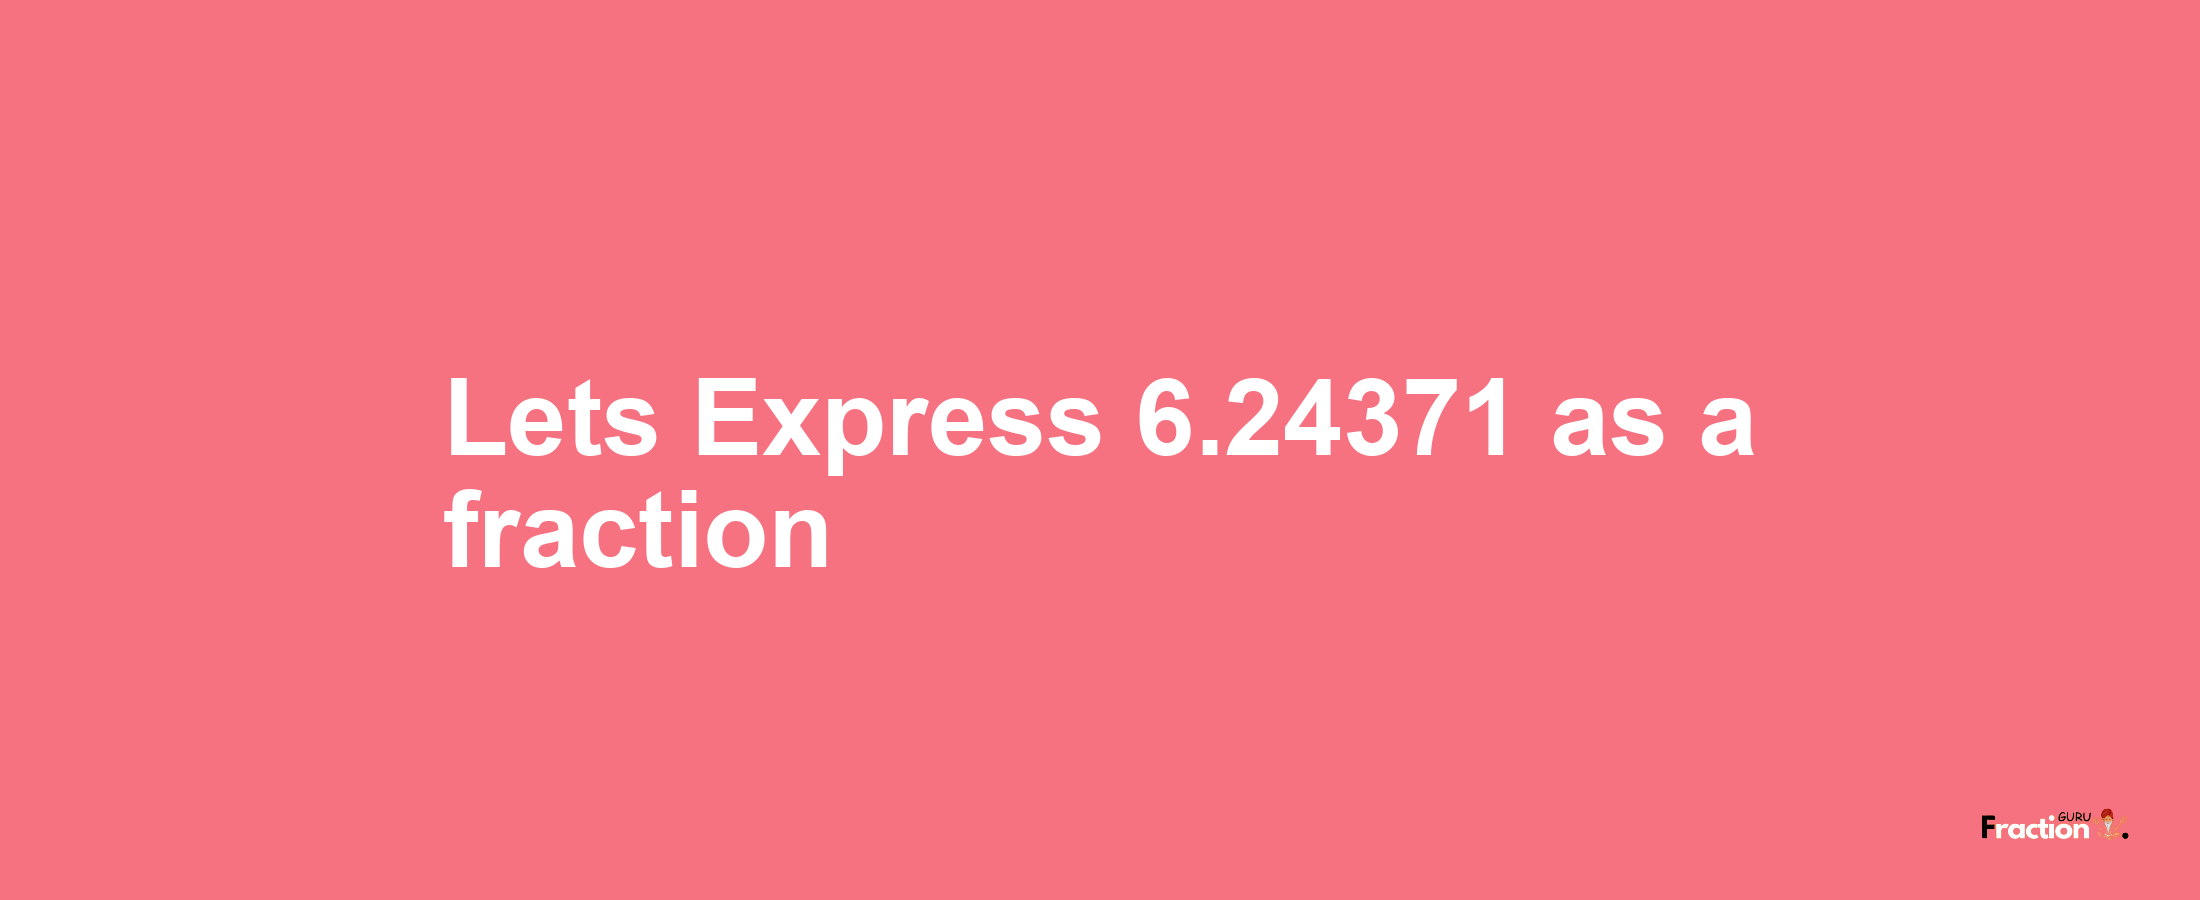 Lets Express 6.24371 as afraction